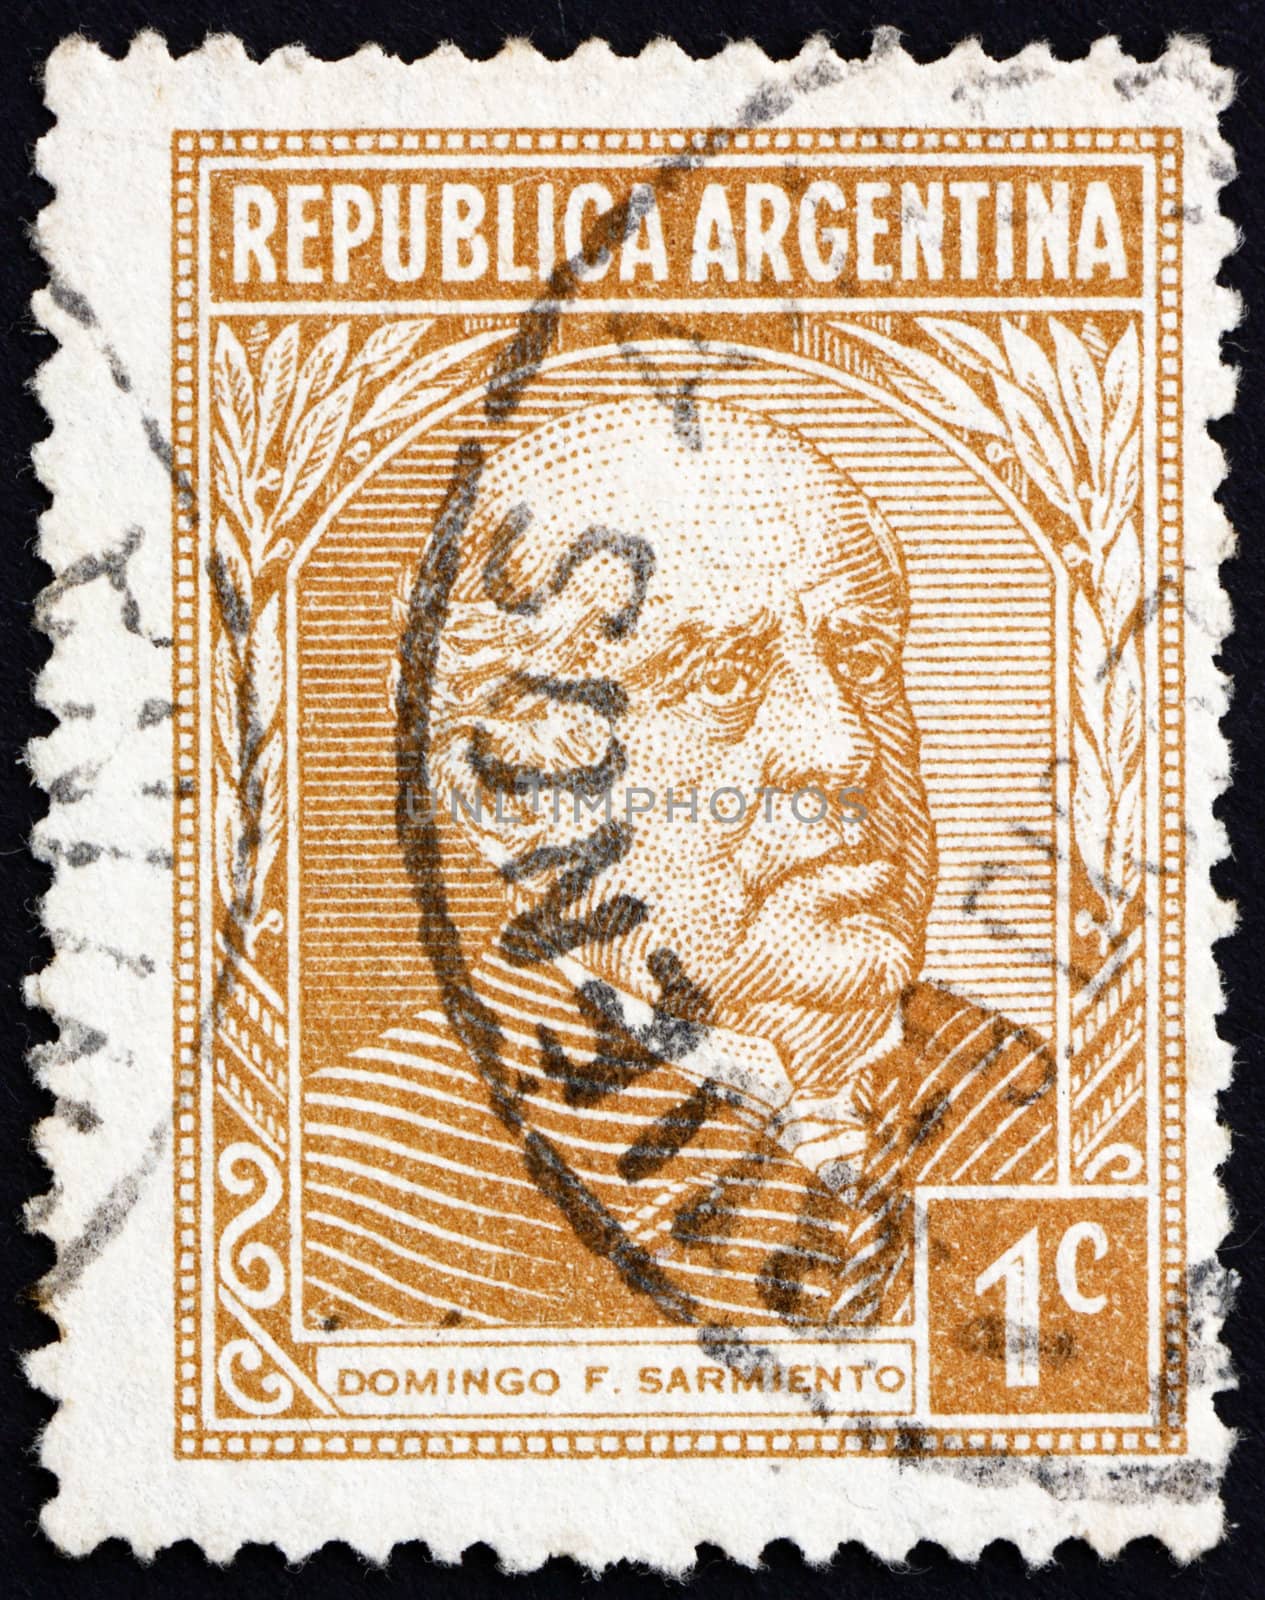 ARGENTINA - CIRCA 1935: a stamp printed in the Argentina shows Domingo Faustino Sarmiento, 7th President of Argentina, 1868 - 1874, circa 1935